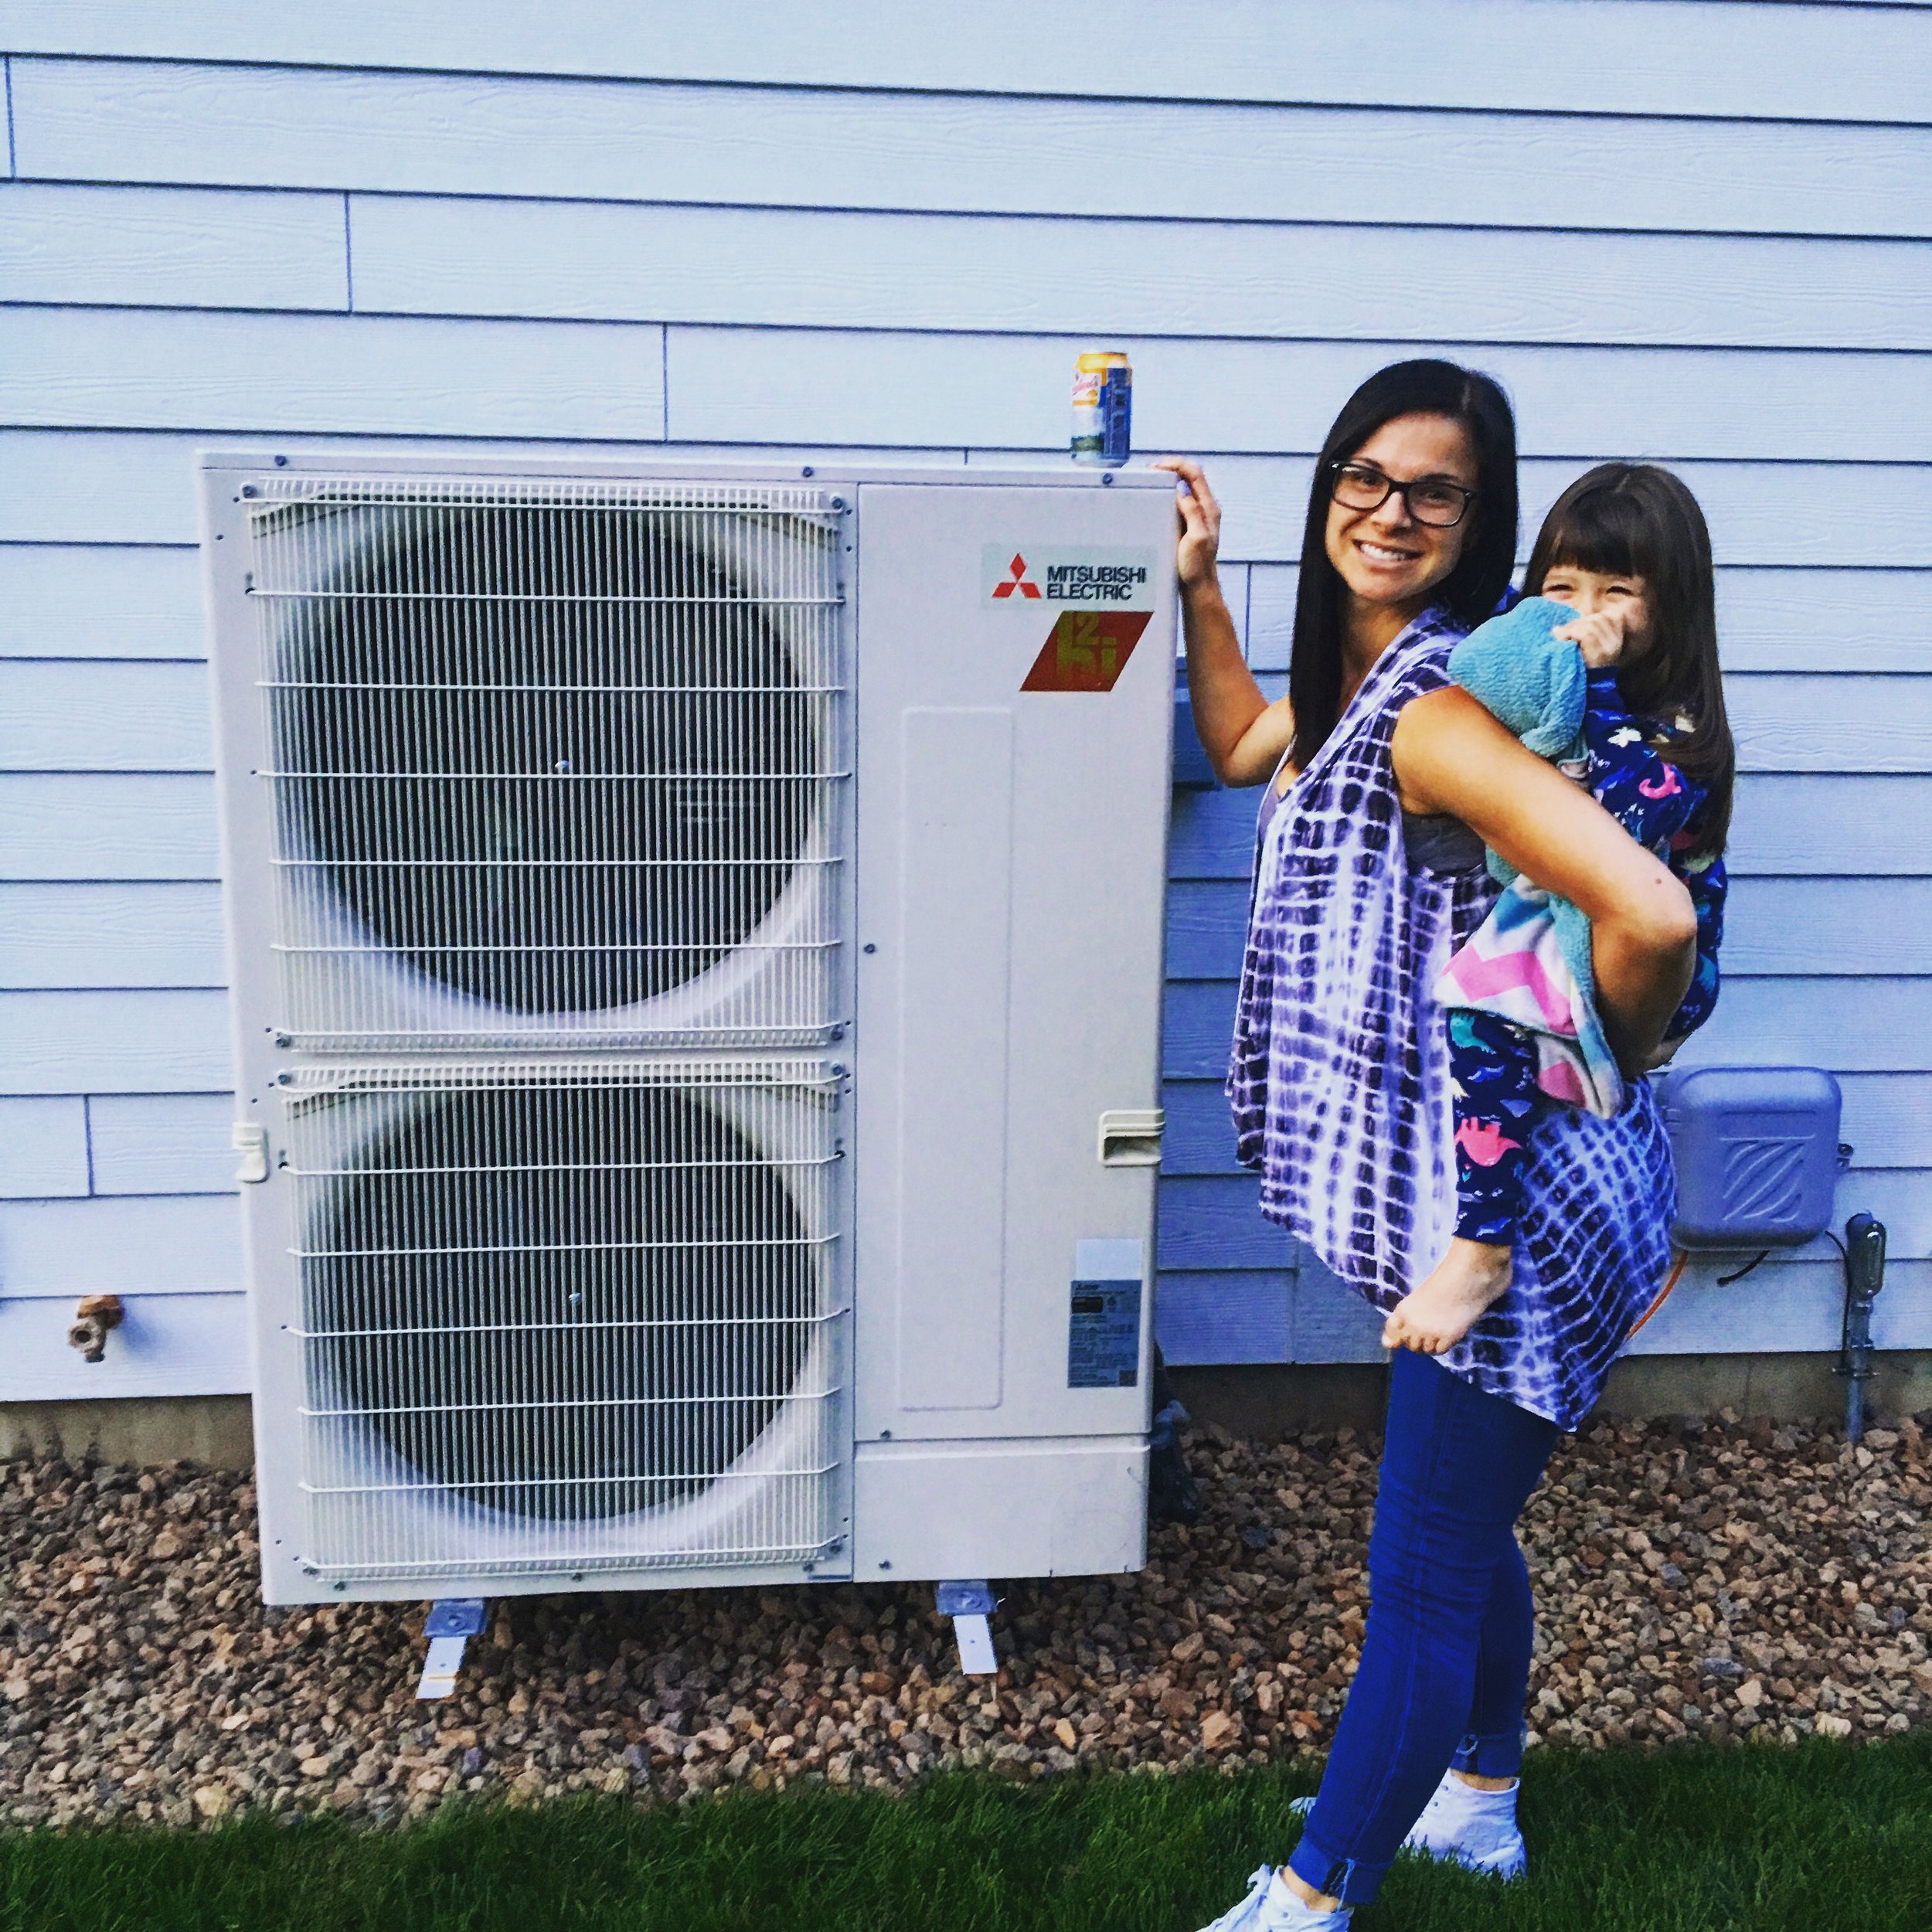 Mitsubishi Hyperheat HVAC Ductless System in New Construction Home Bourbonnais, IL 60914